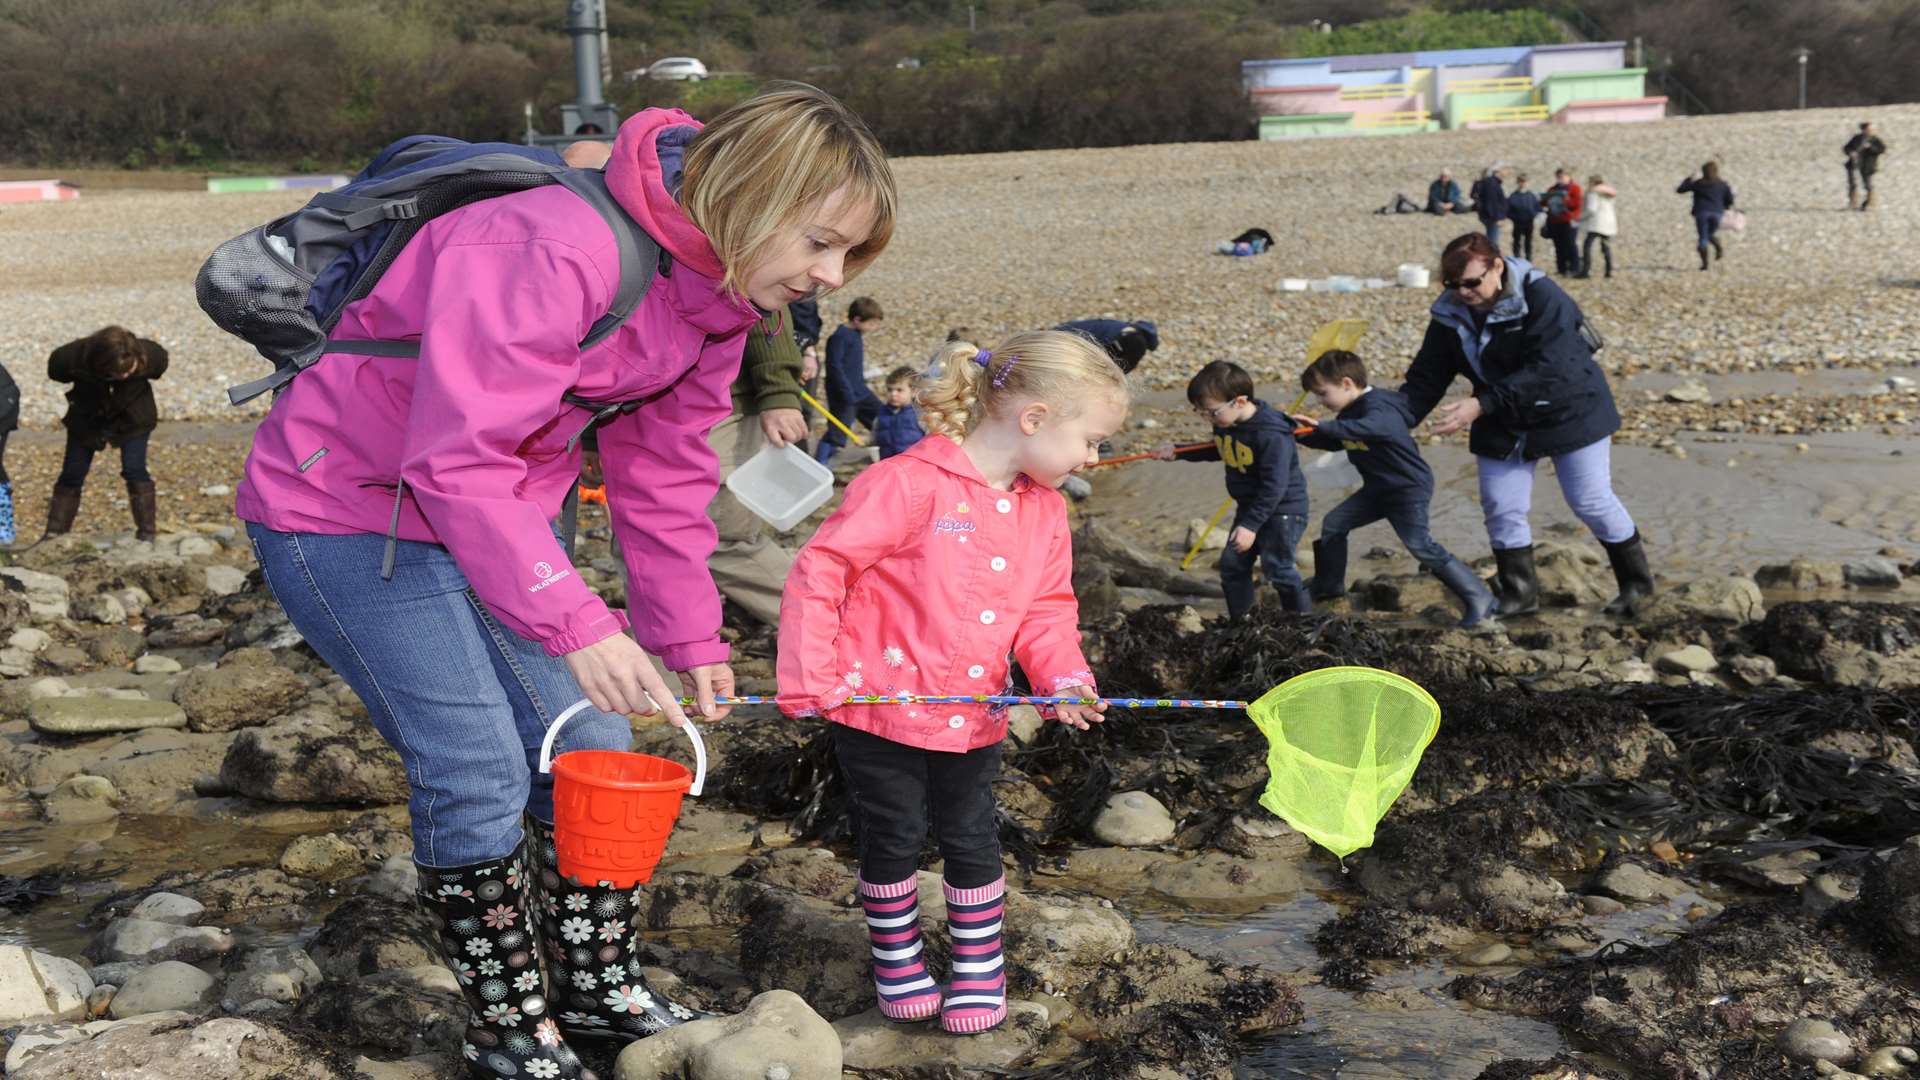 Rock pooling offers fun for all the family